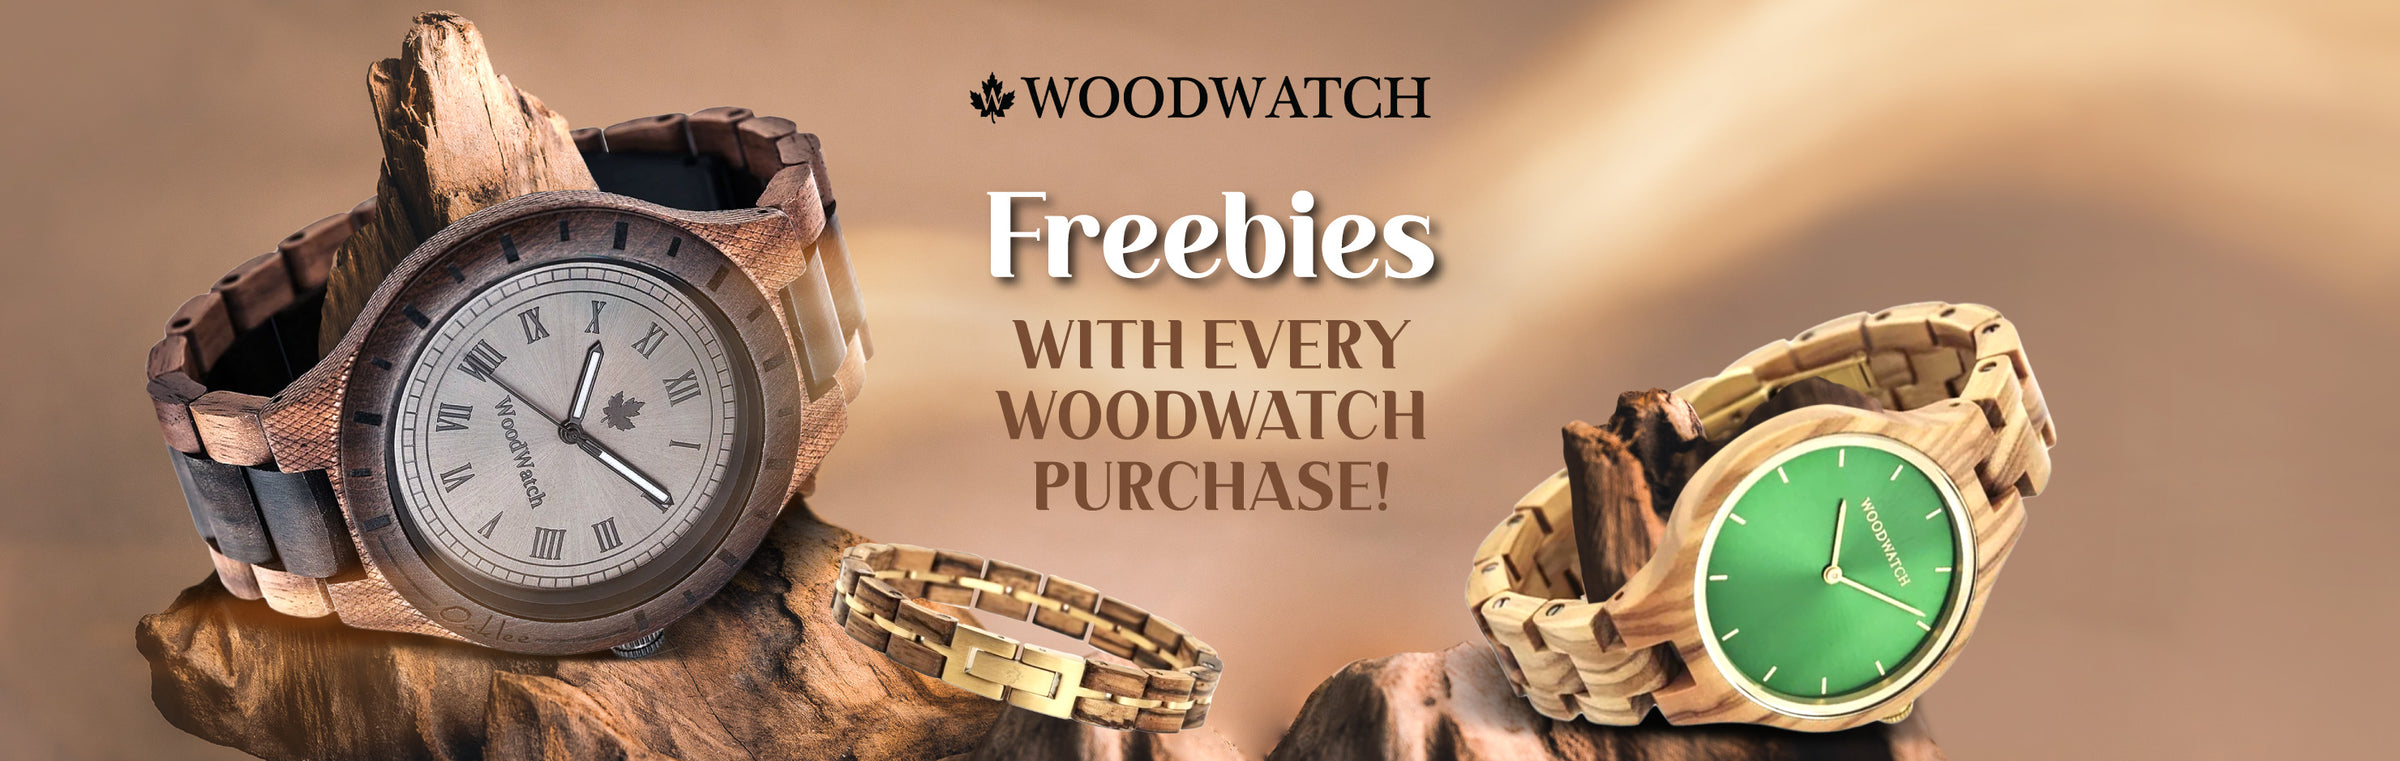 WOODWATCH GIFT OFFER